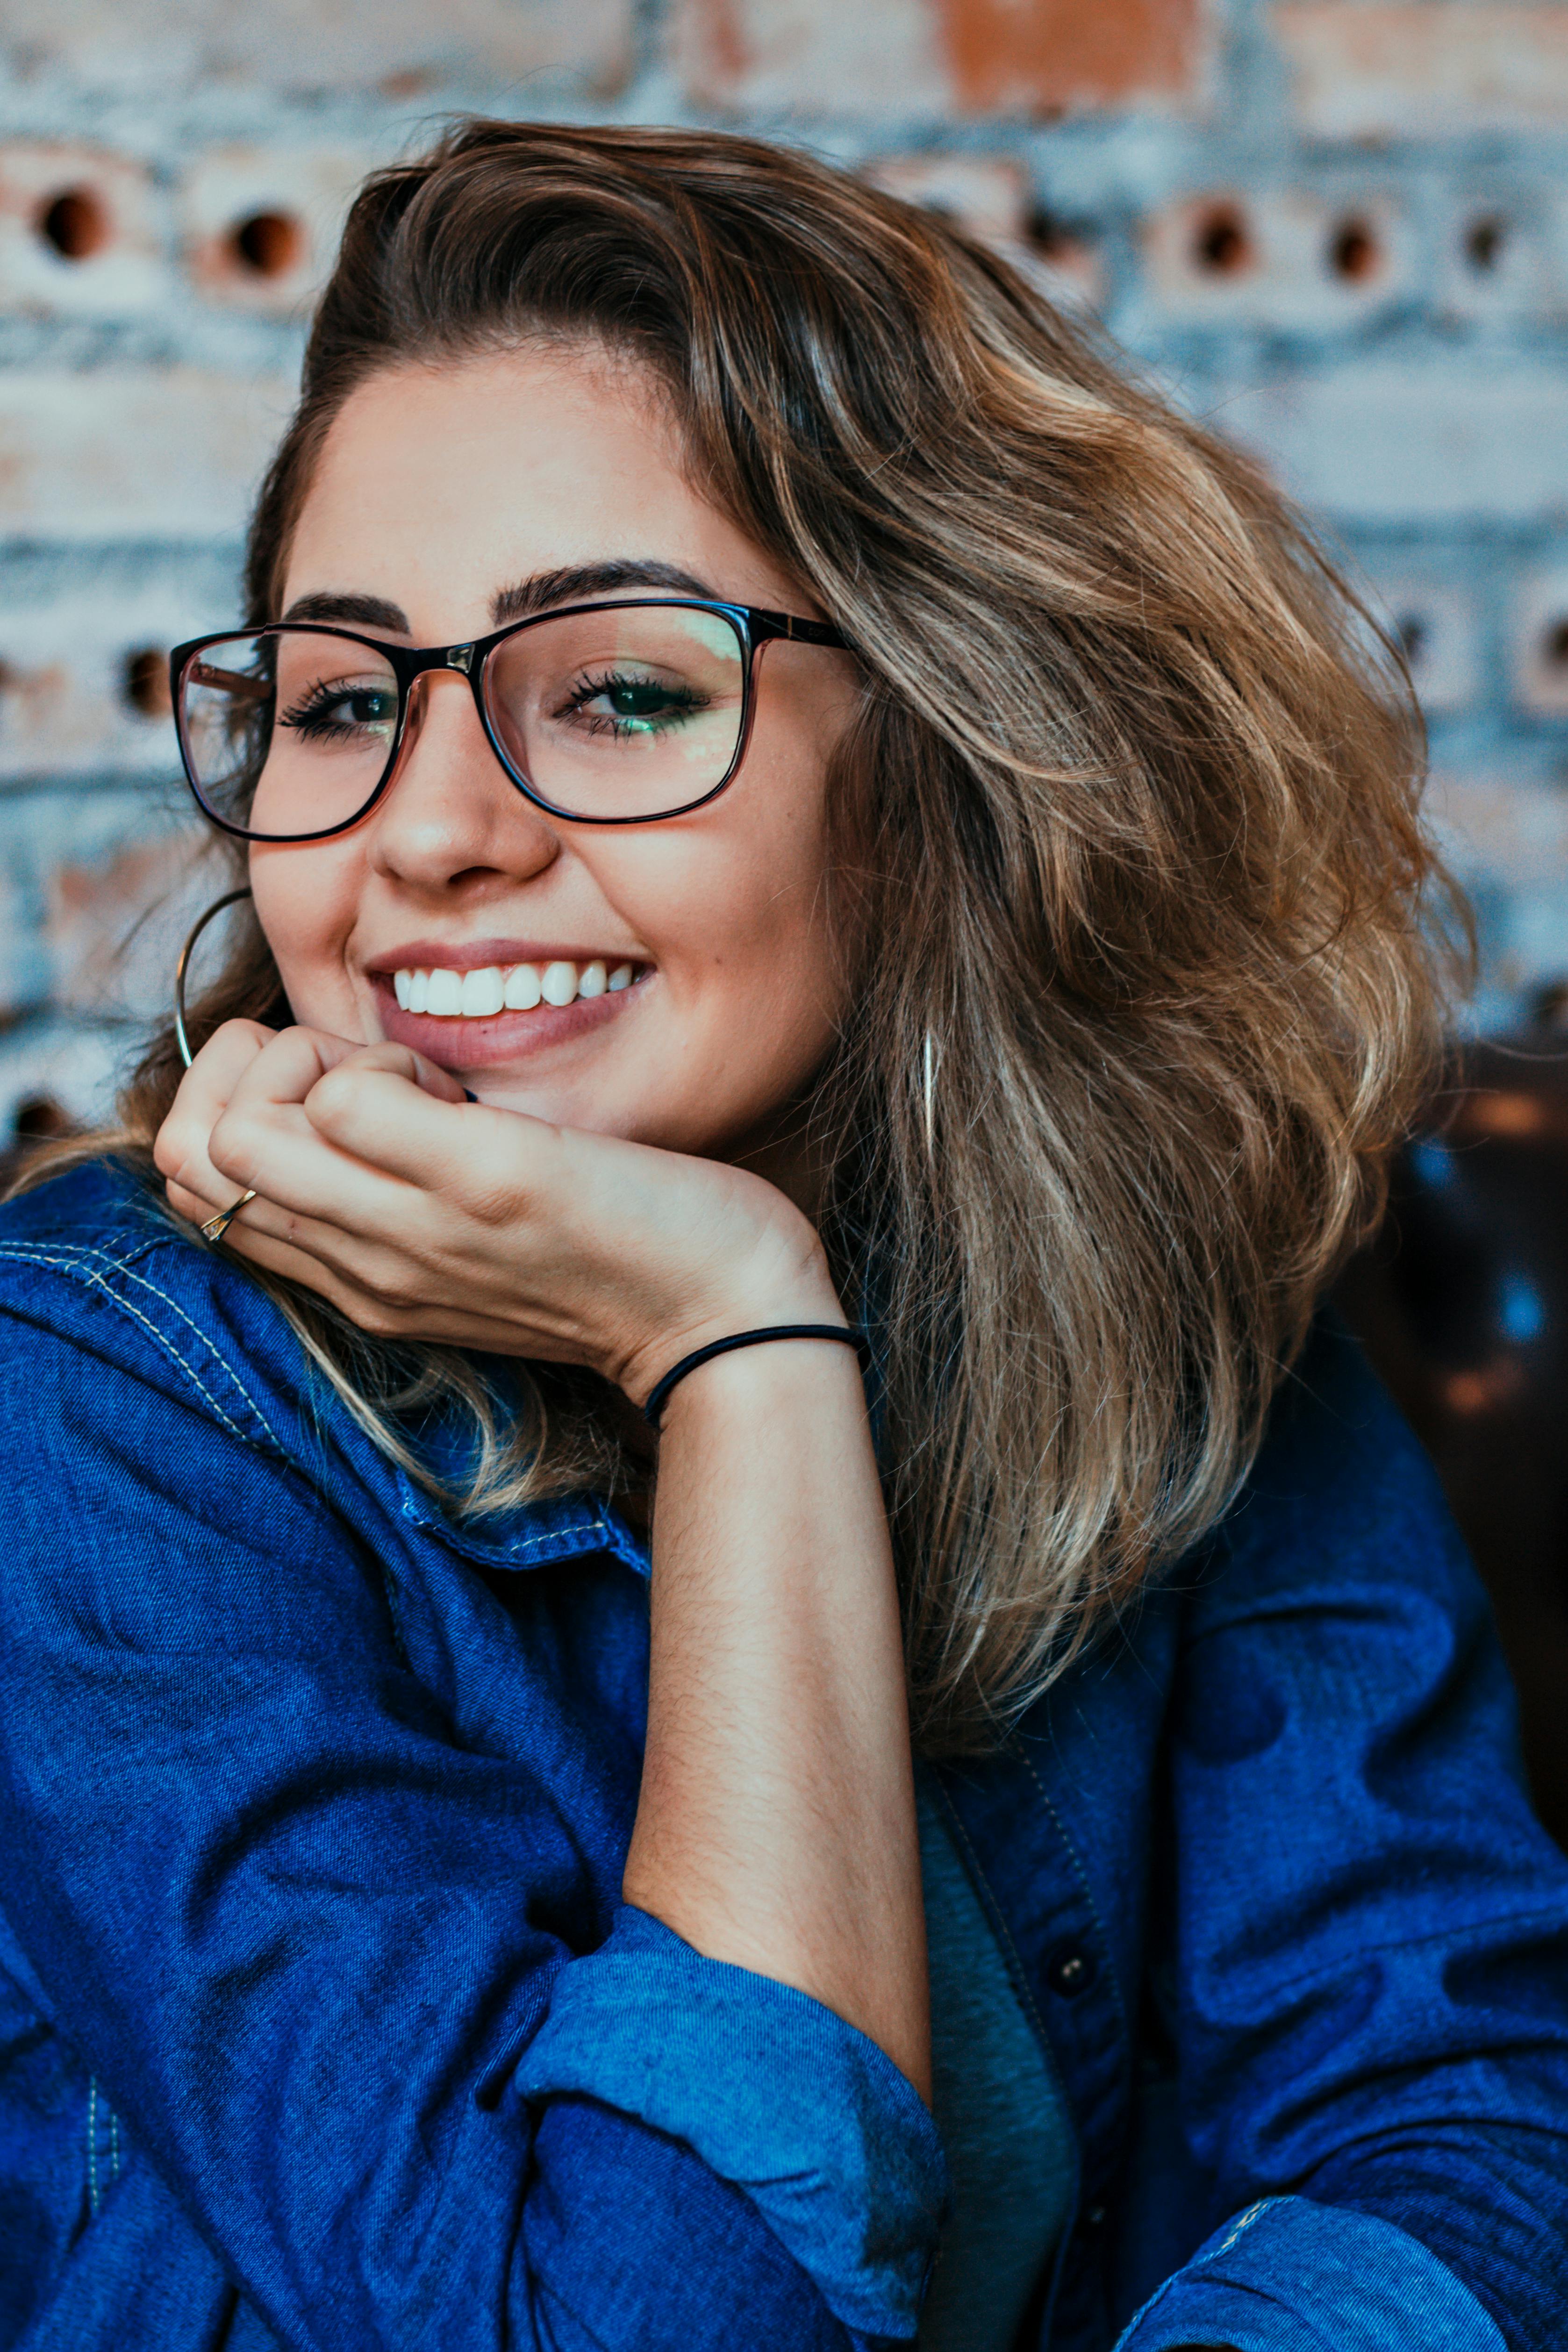 60,000+ Best Smile Images · 100% Free Download · Pexels Stock Photos